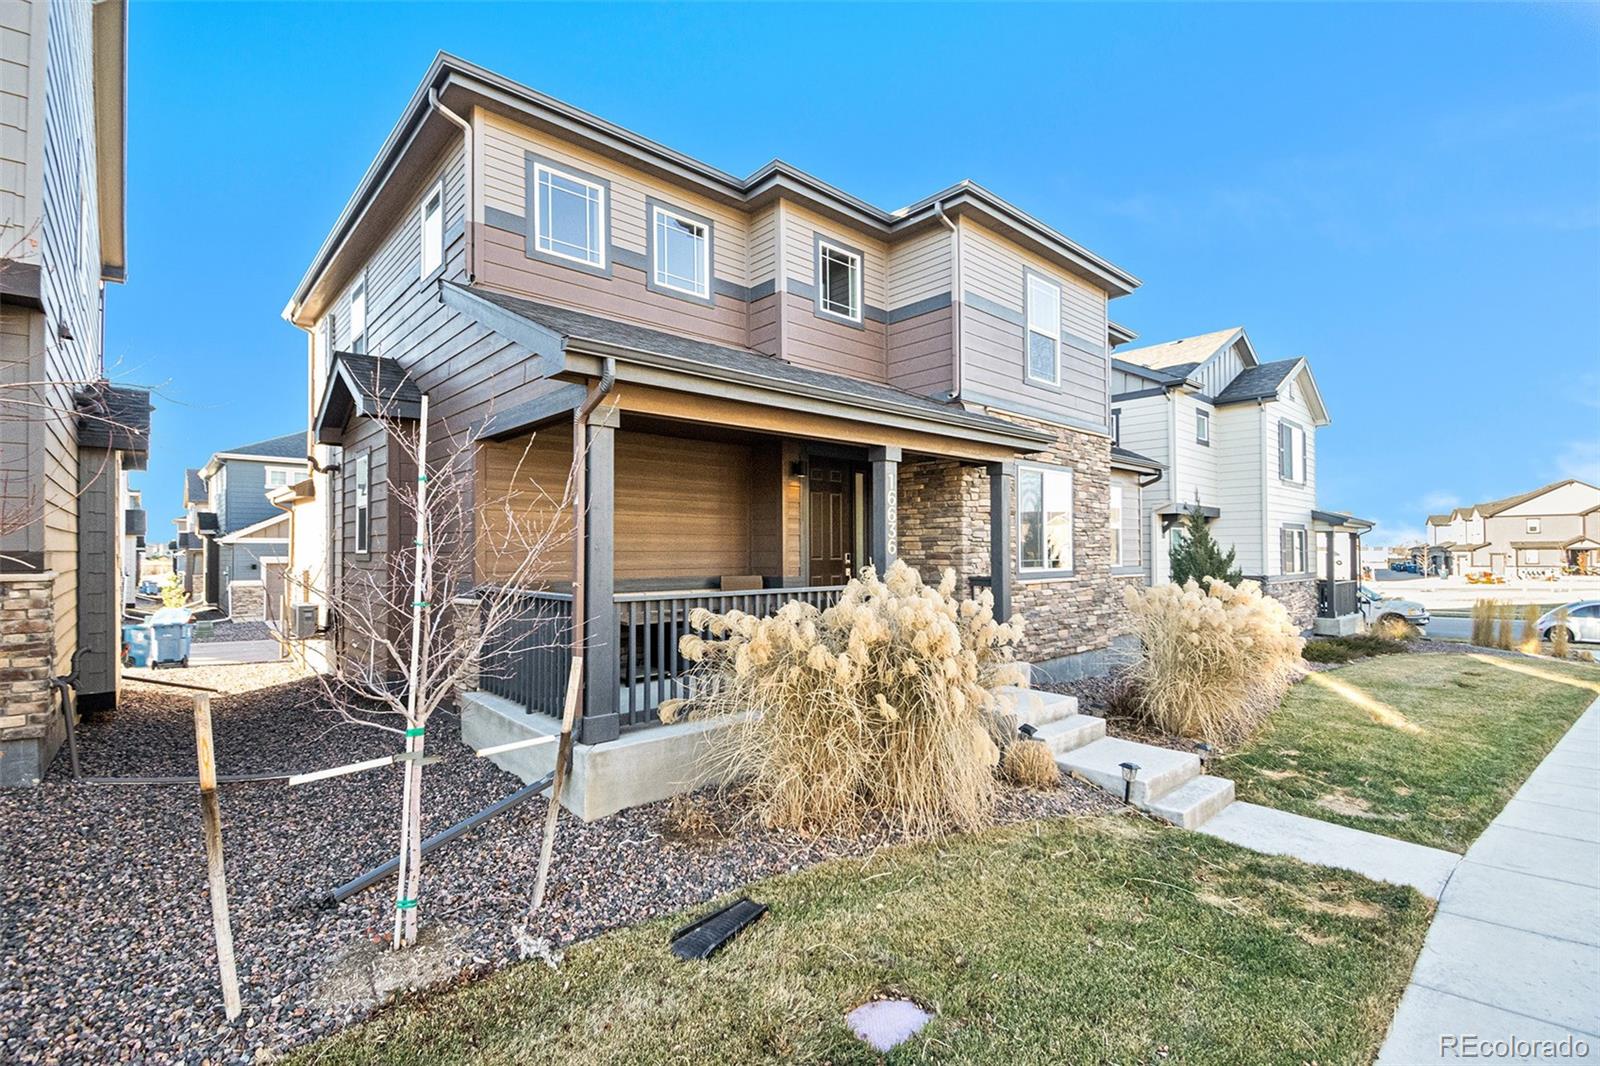 16636 e 118th drive, Commerce City sold home. Closed on 2024-02-09 for $509,000.